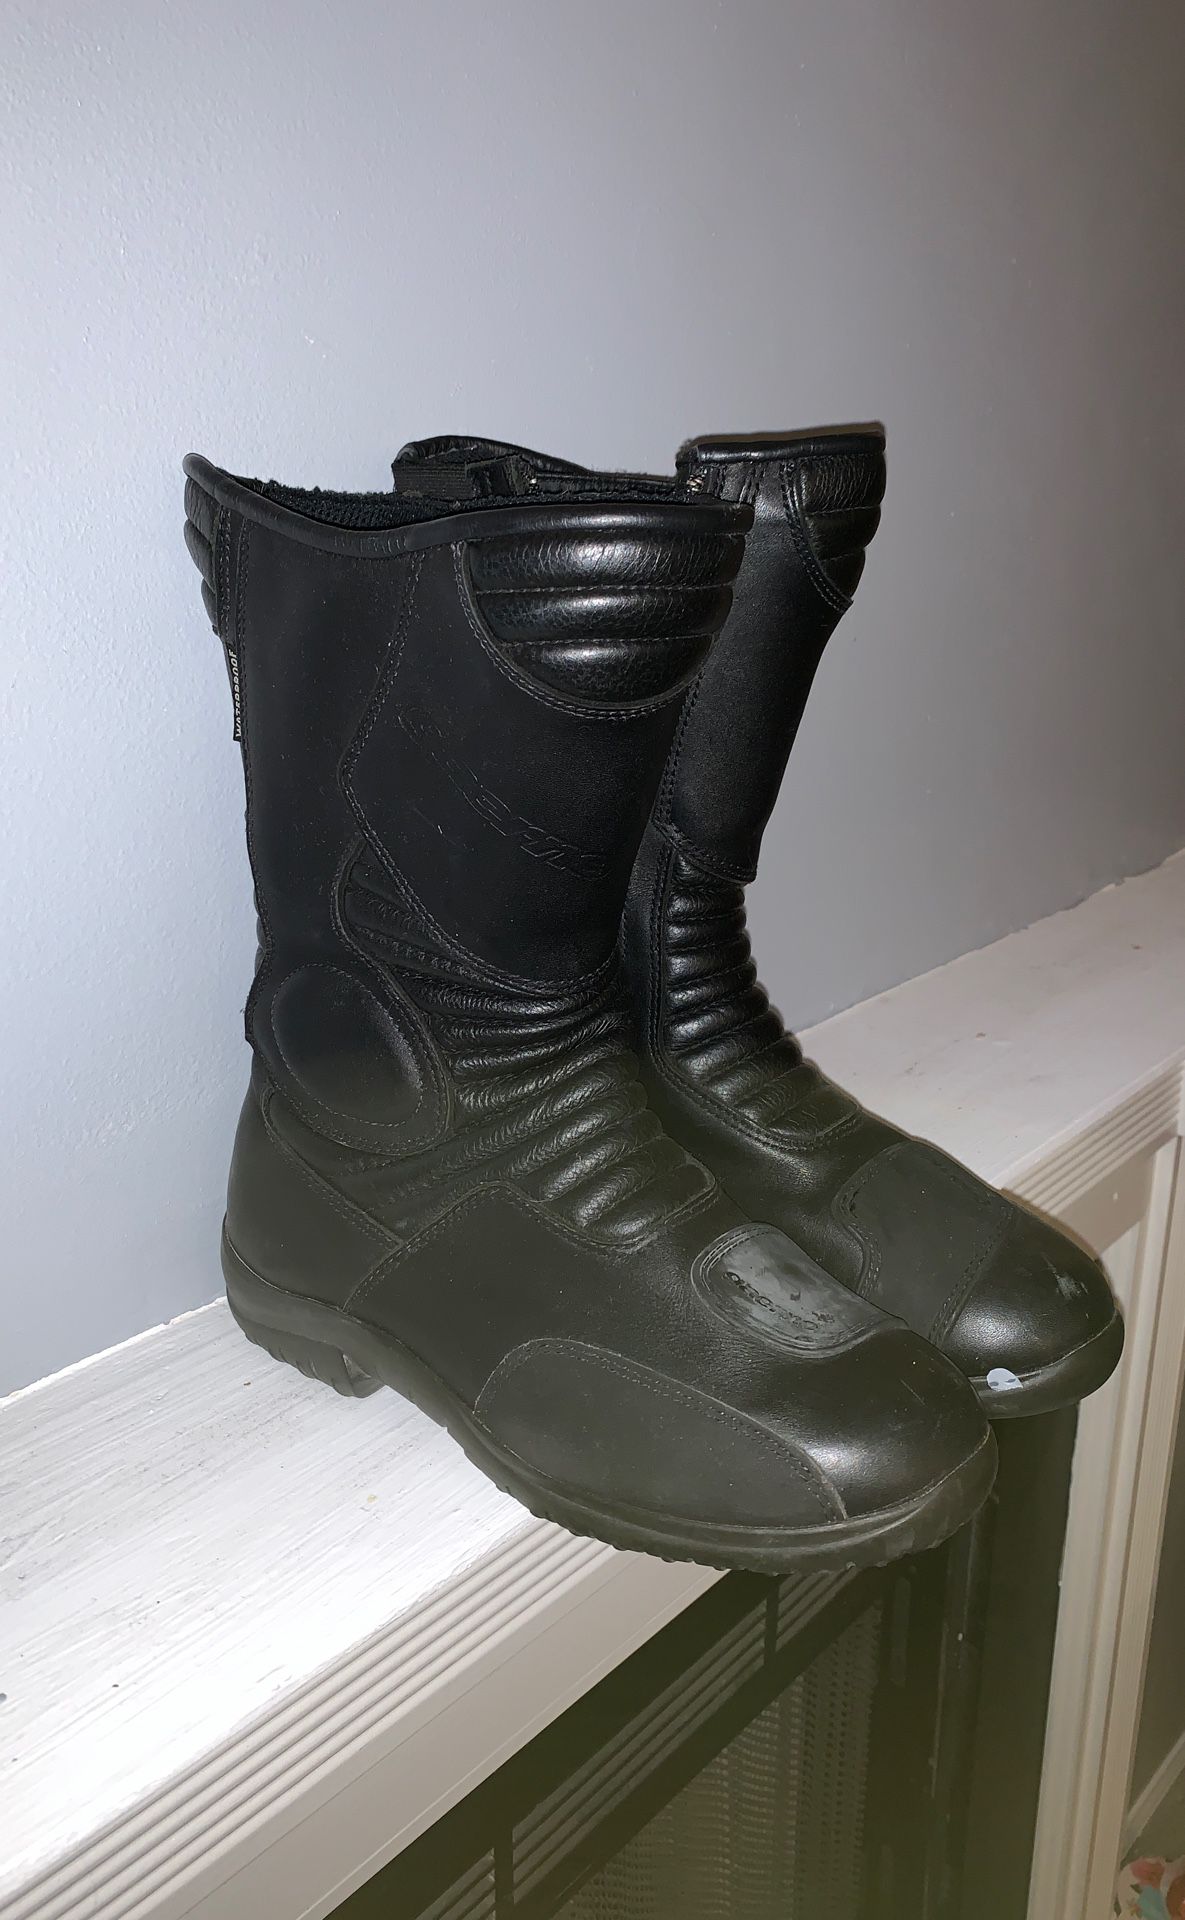 Gaerne Black Rose motorcycle boots size 8